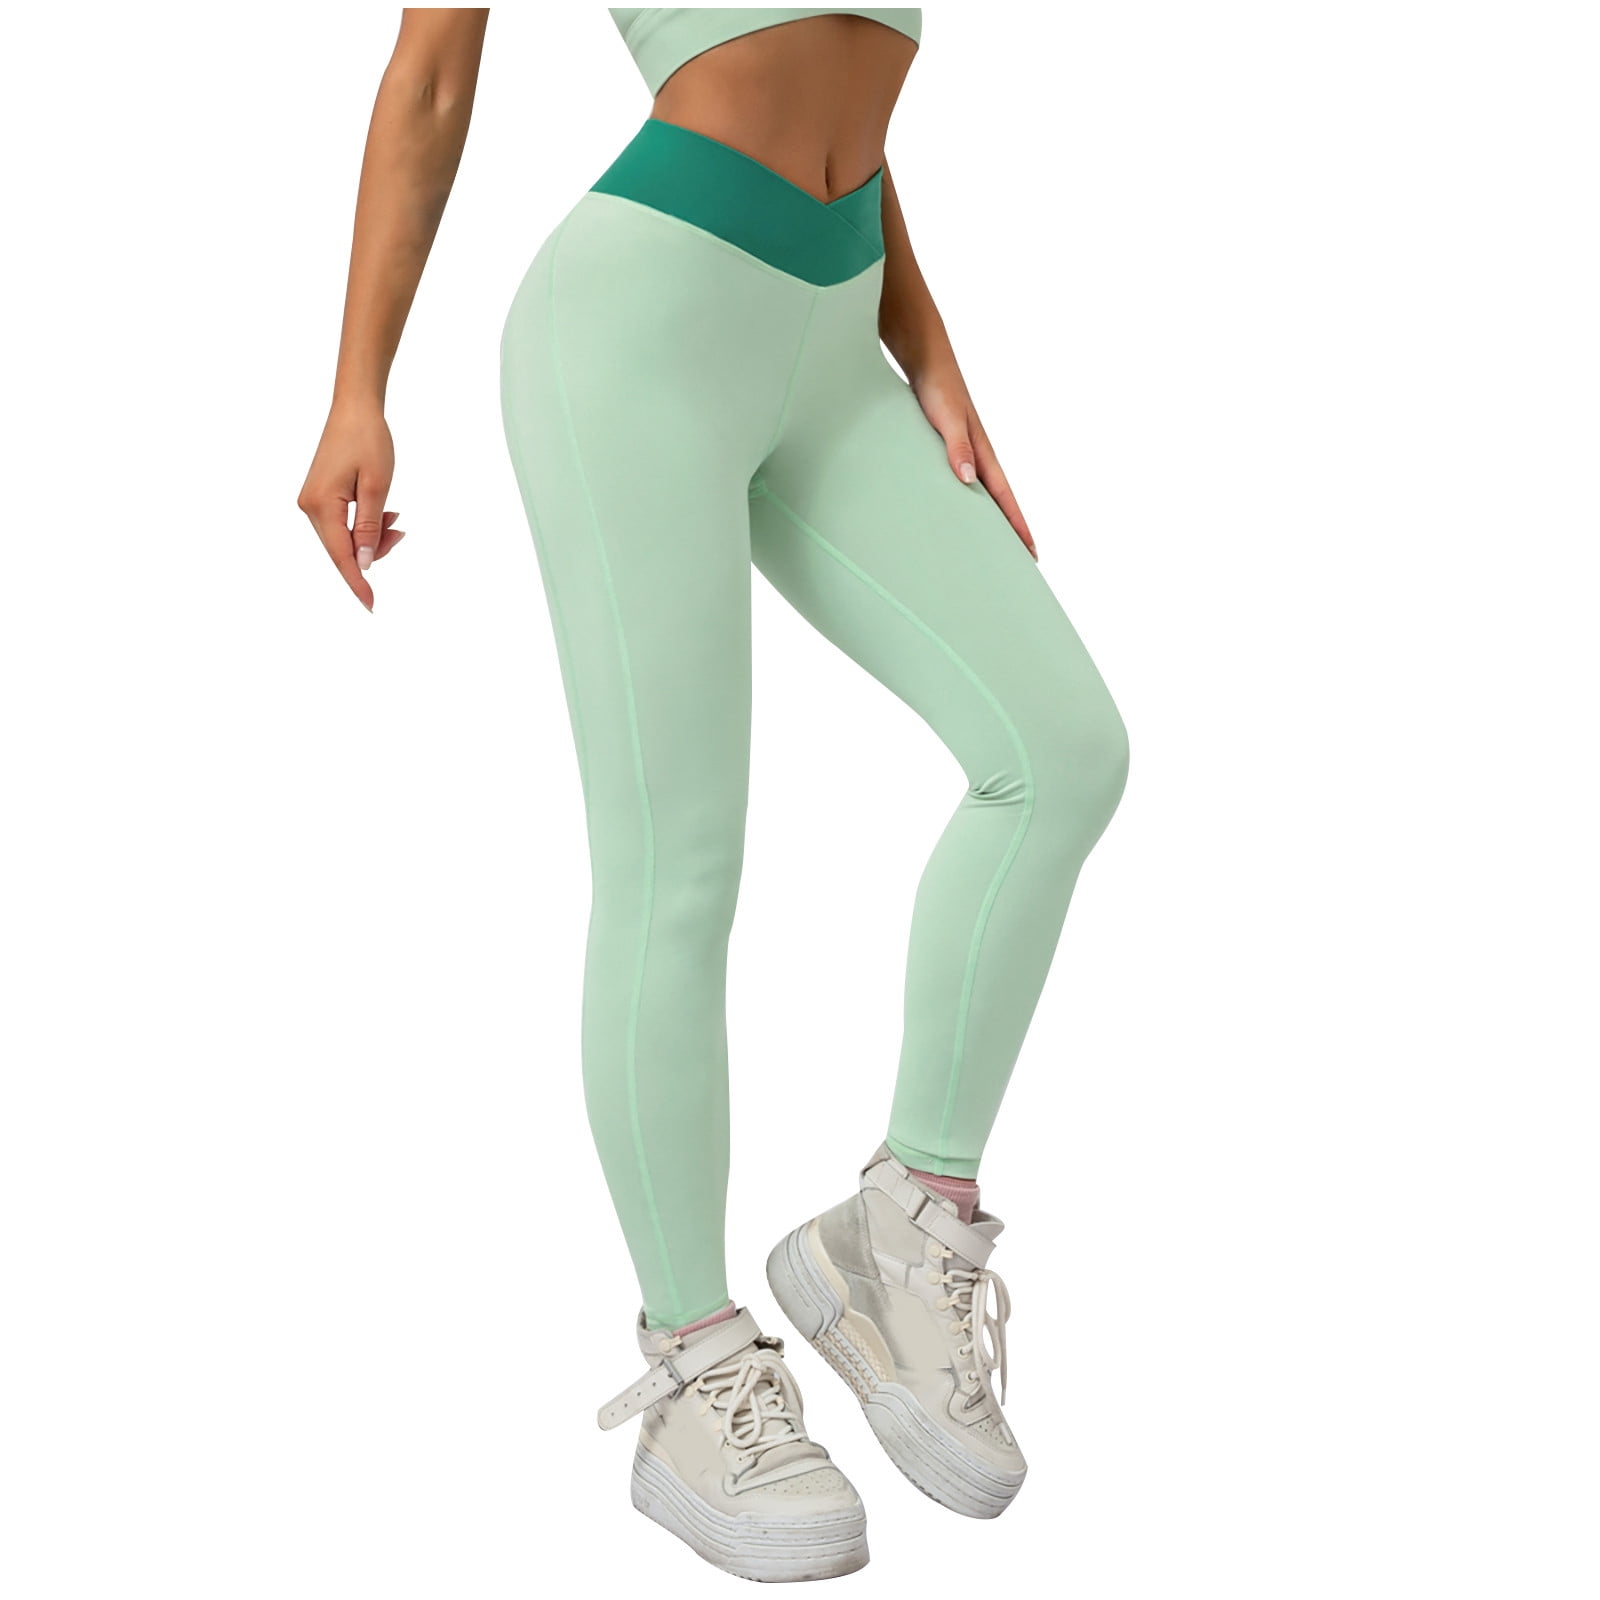 High Waisted Leggings for Women Tummy Control Workout Running Yoga Pants  Clearance Sale Women's High Waist Yoga Short Abdomen Control Training  Running